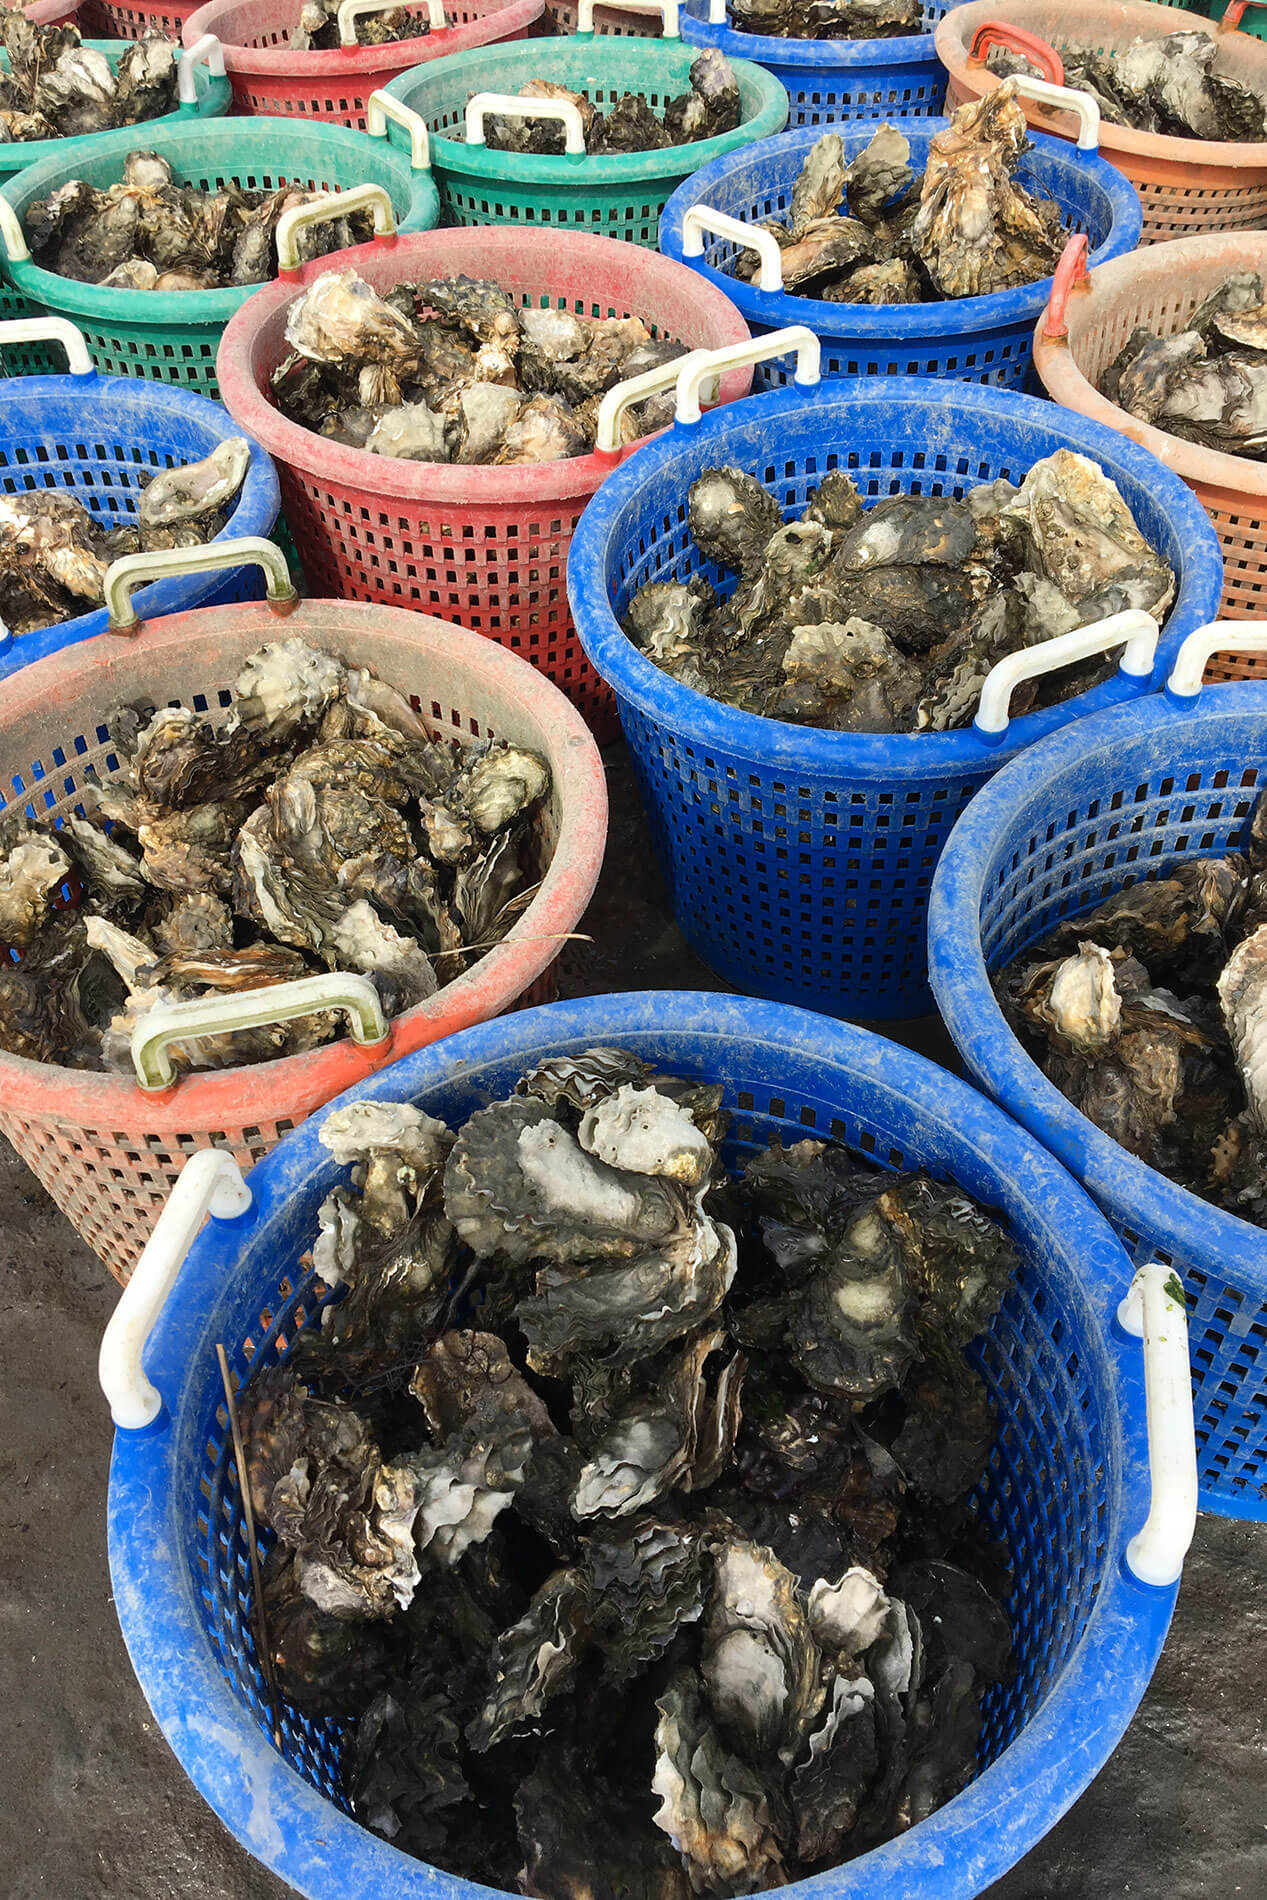 NOAA Harmful Algae Research Supports Resumption of Shellfish Trade with Europe